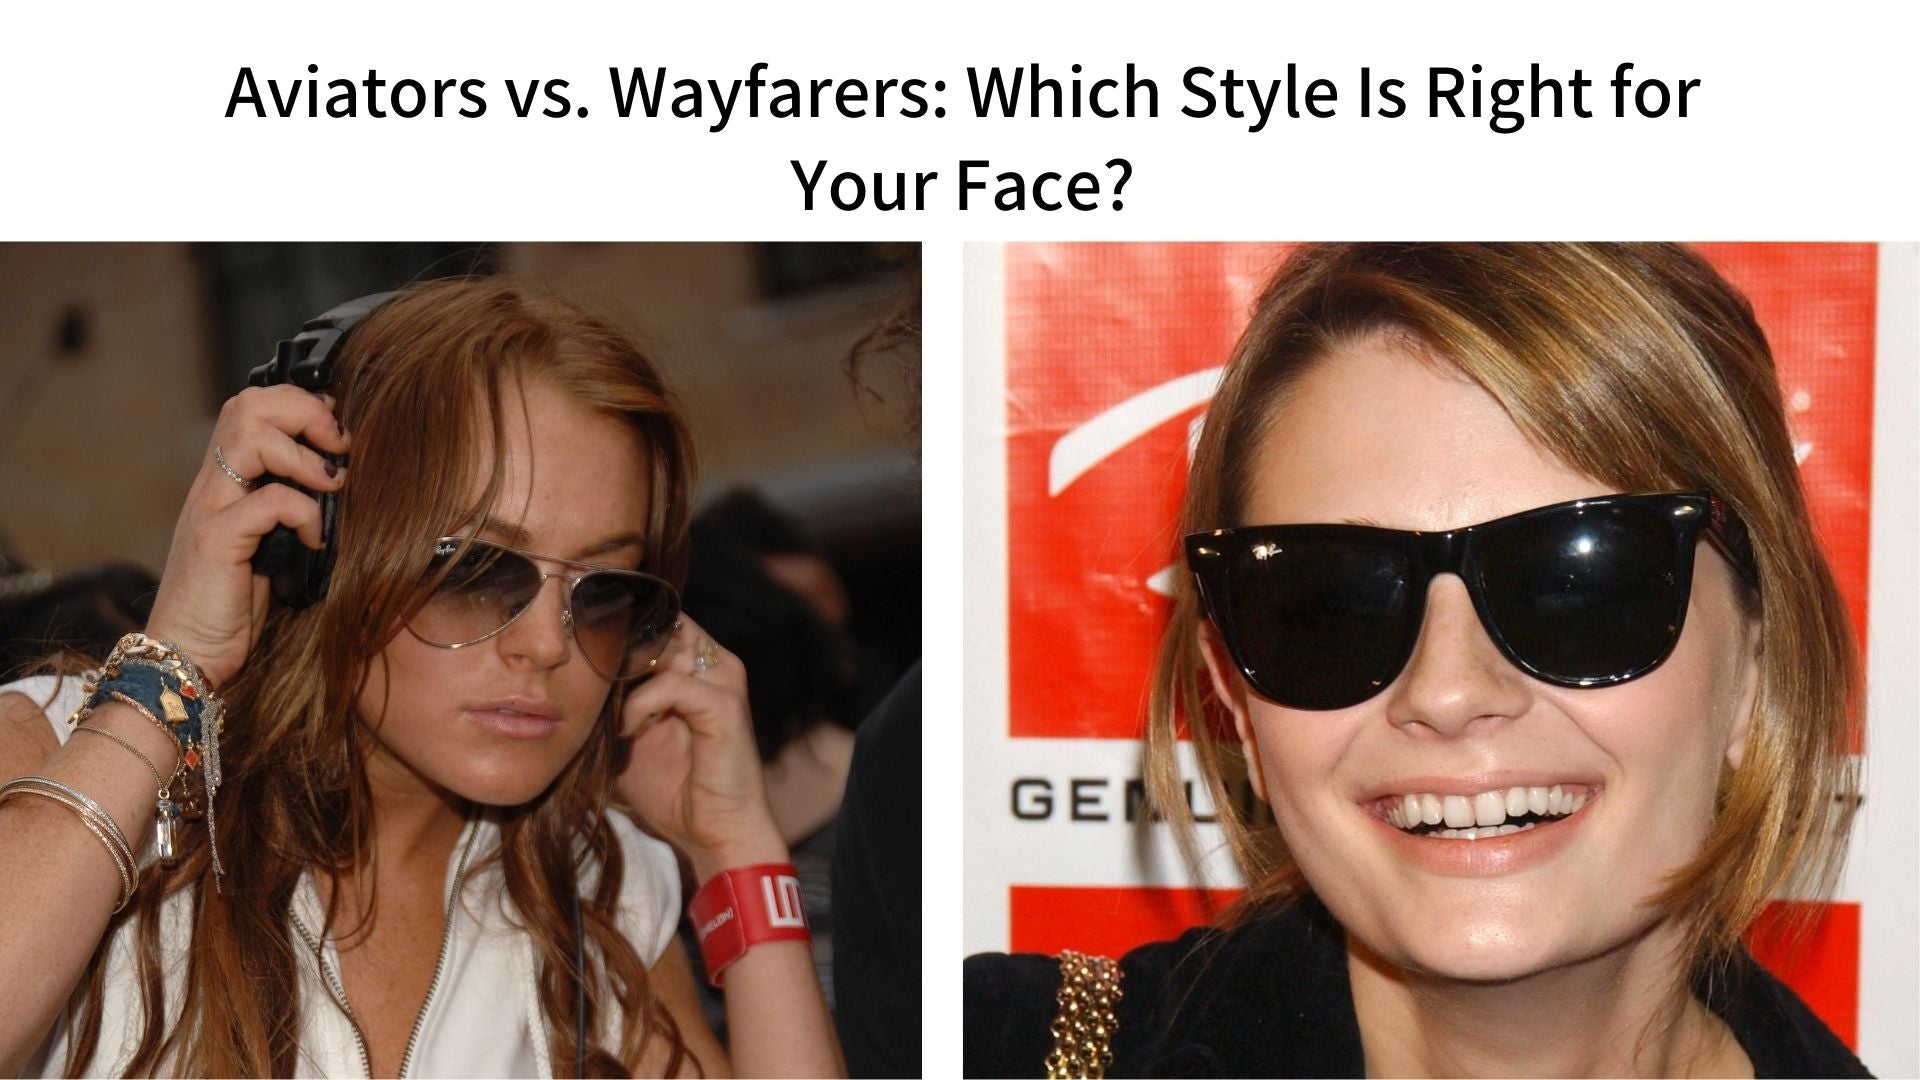 Aviators vs. Wayfarers: Which Style Is Right for Your Face?